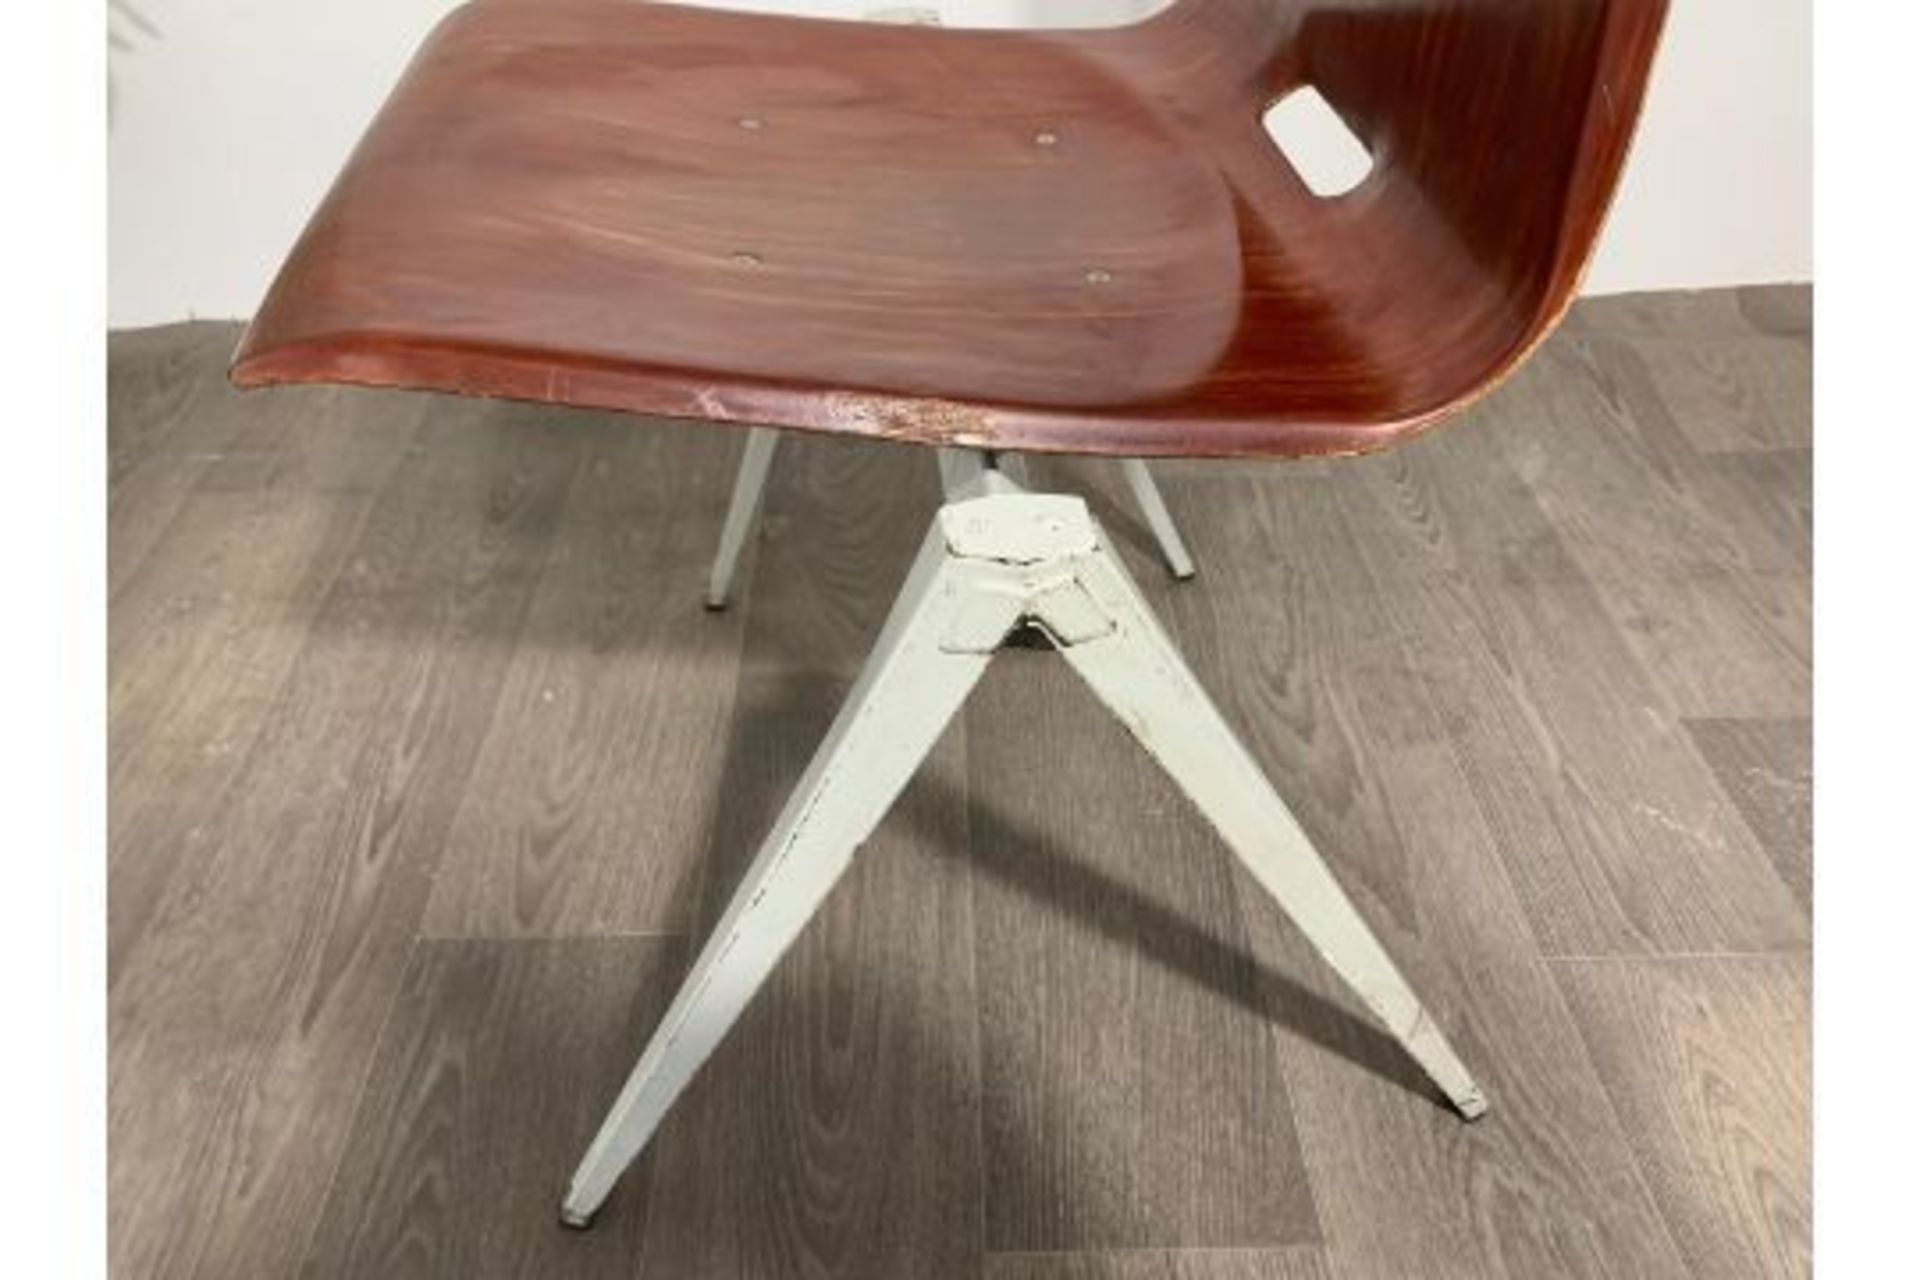 Thur Op Seat Stack-able Chair x4 - Image 3 of 3